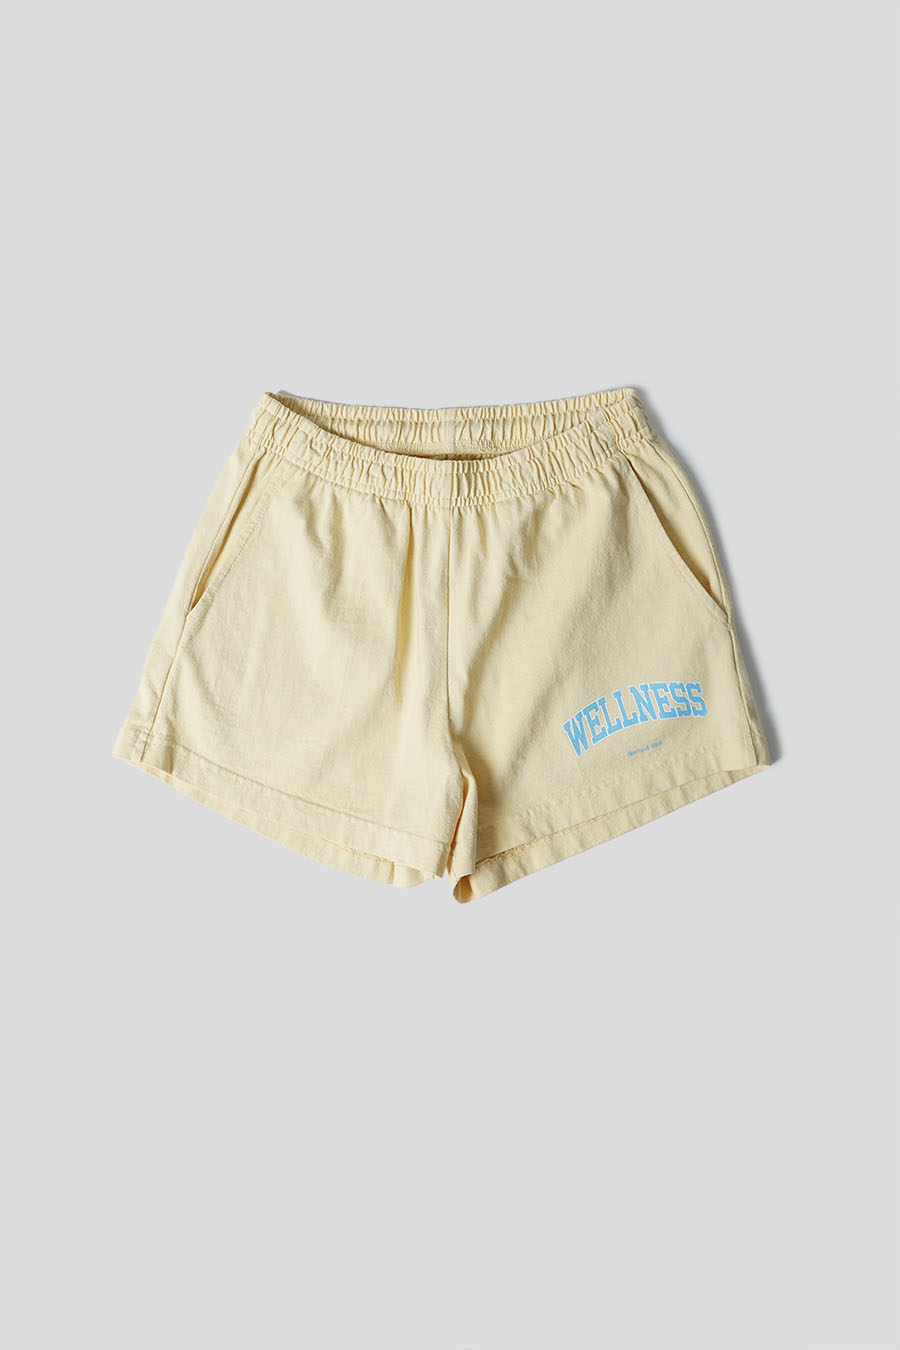 Sporty & Rich - DISCO WELLNESS IVY SHORTS PALE YELLOW - LE LABO STORE